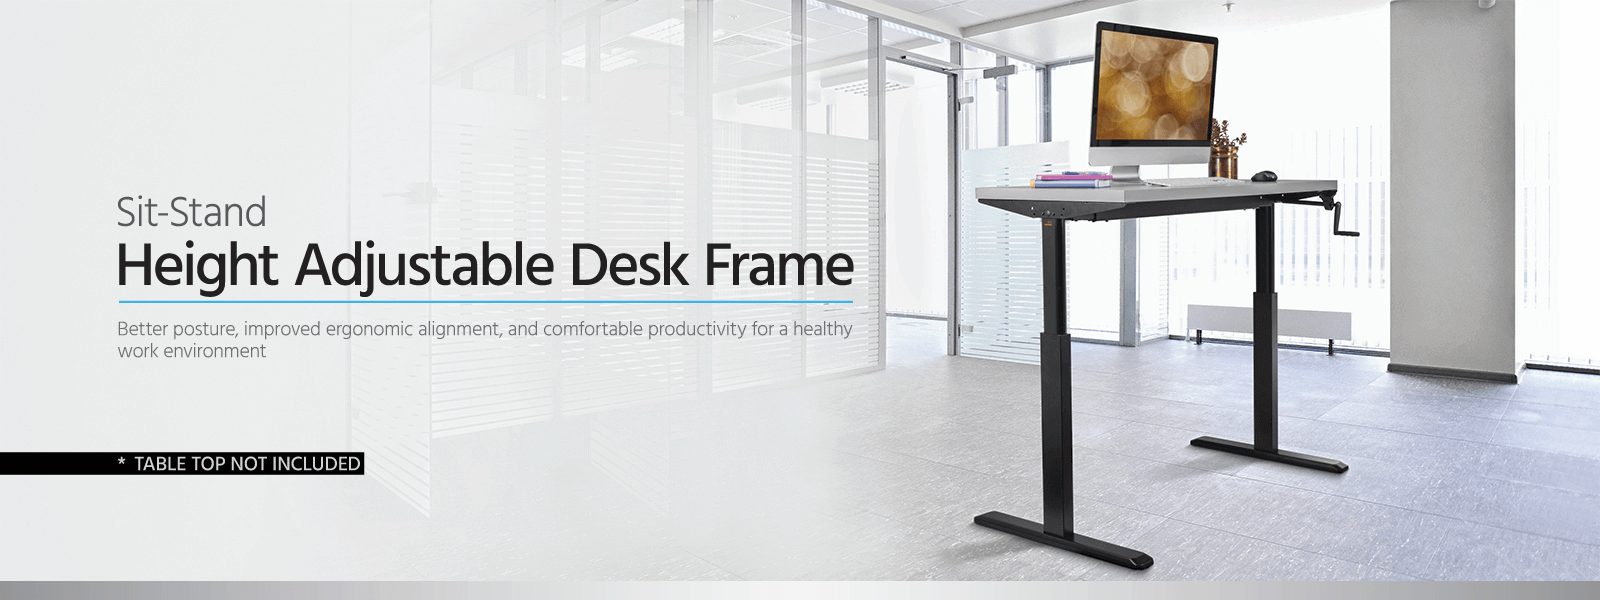 Dual Motor 3 Stages Standing Desk Adjustable Height for Home Office PROGRESSIVE AUTOMATIONS Ergonomic Desk 47x26